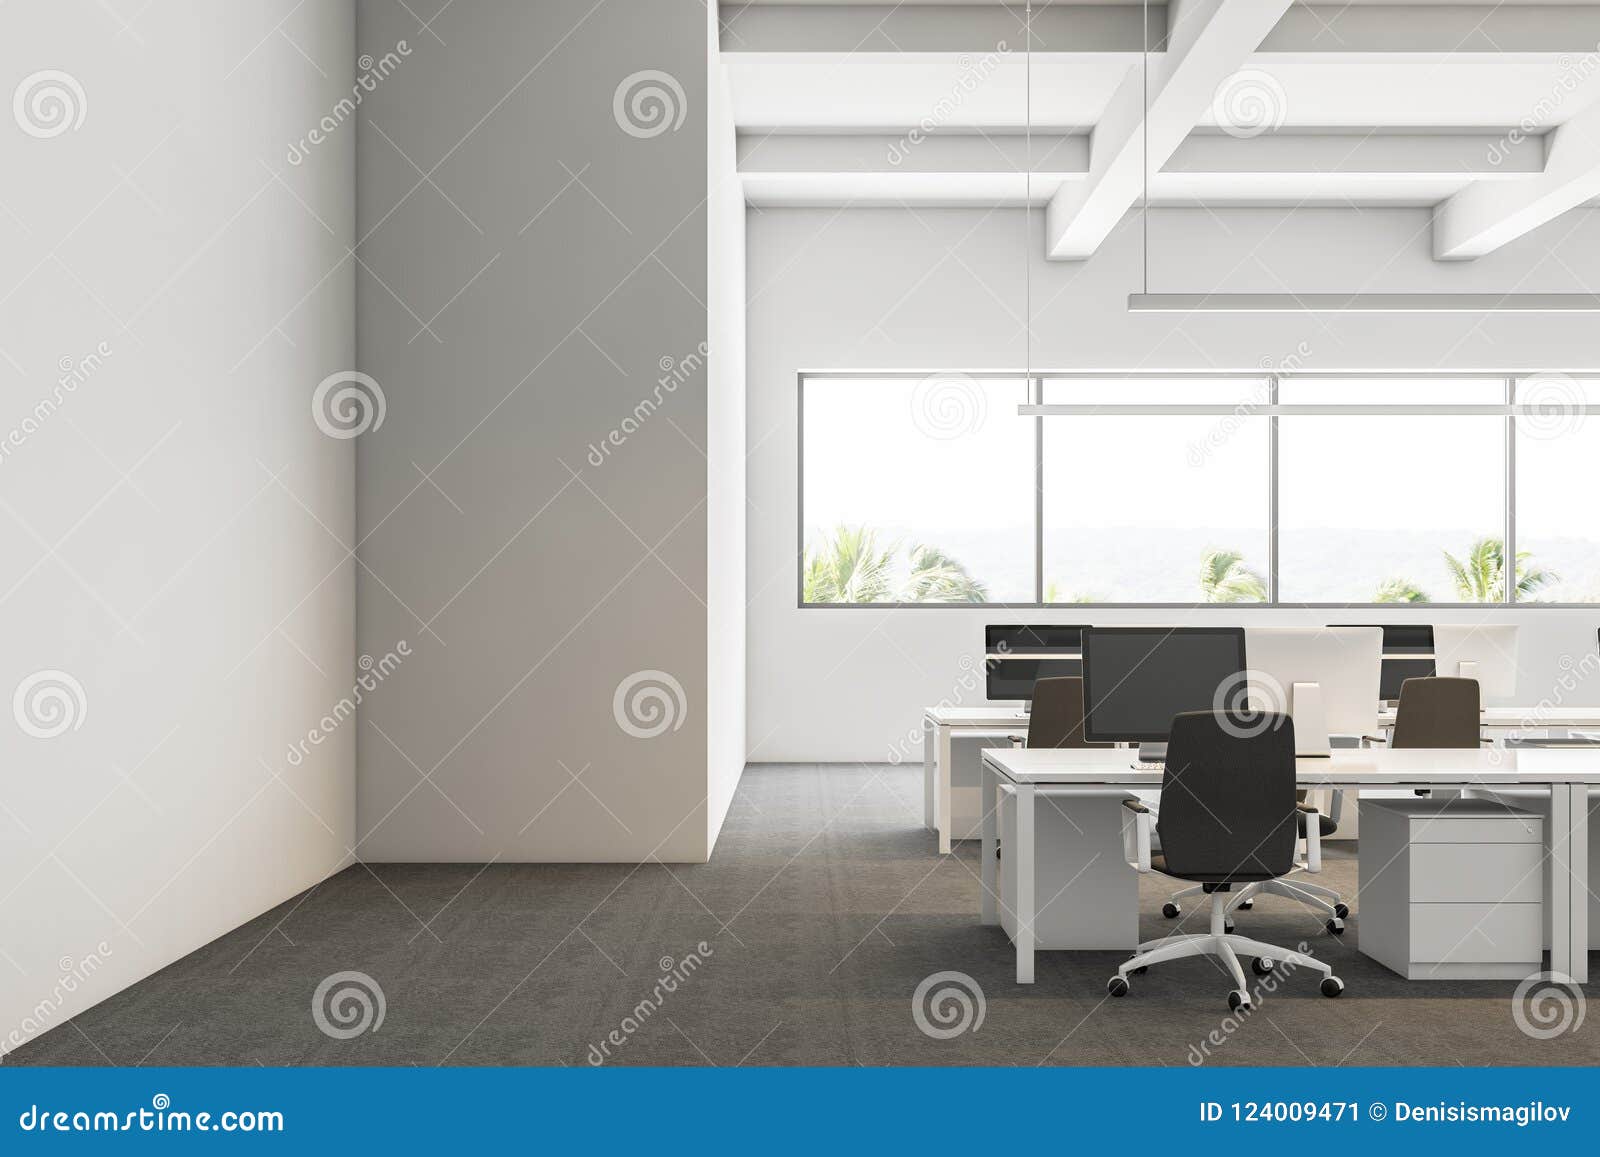 Front View Of A Tropic Startup Interior Design Stock